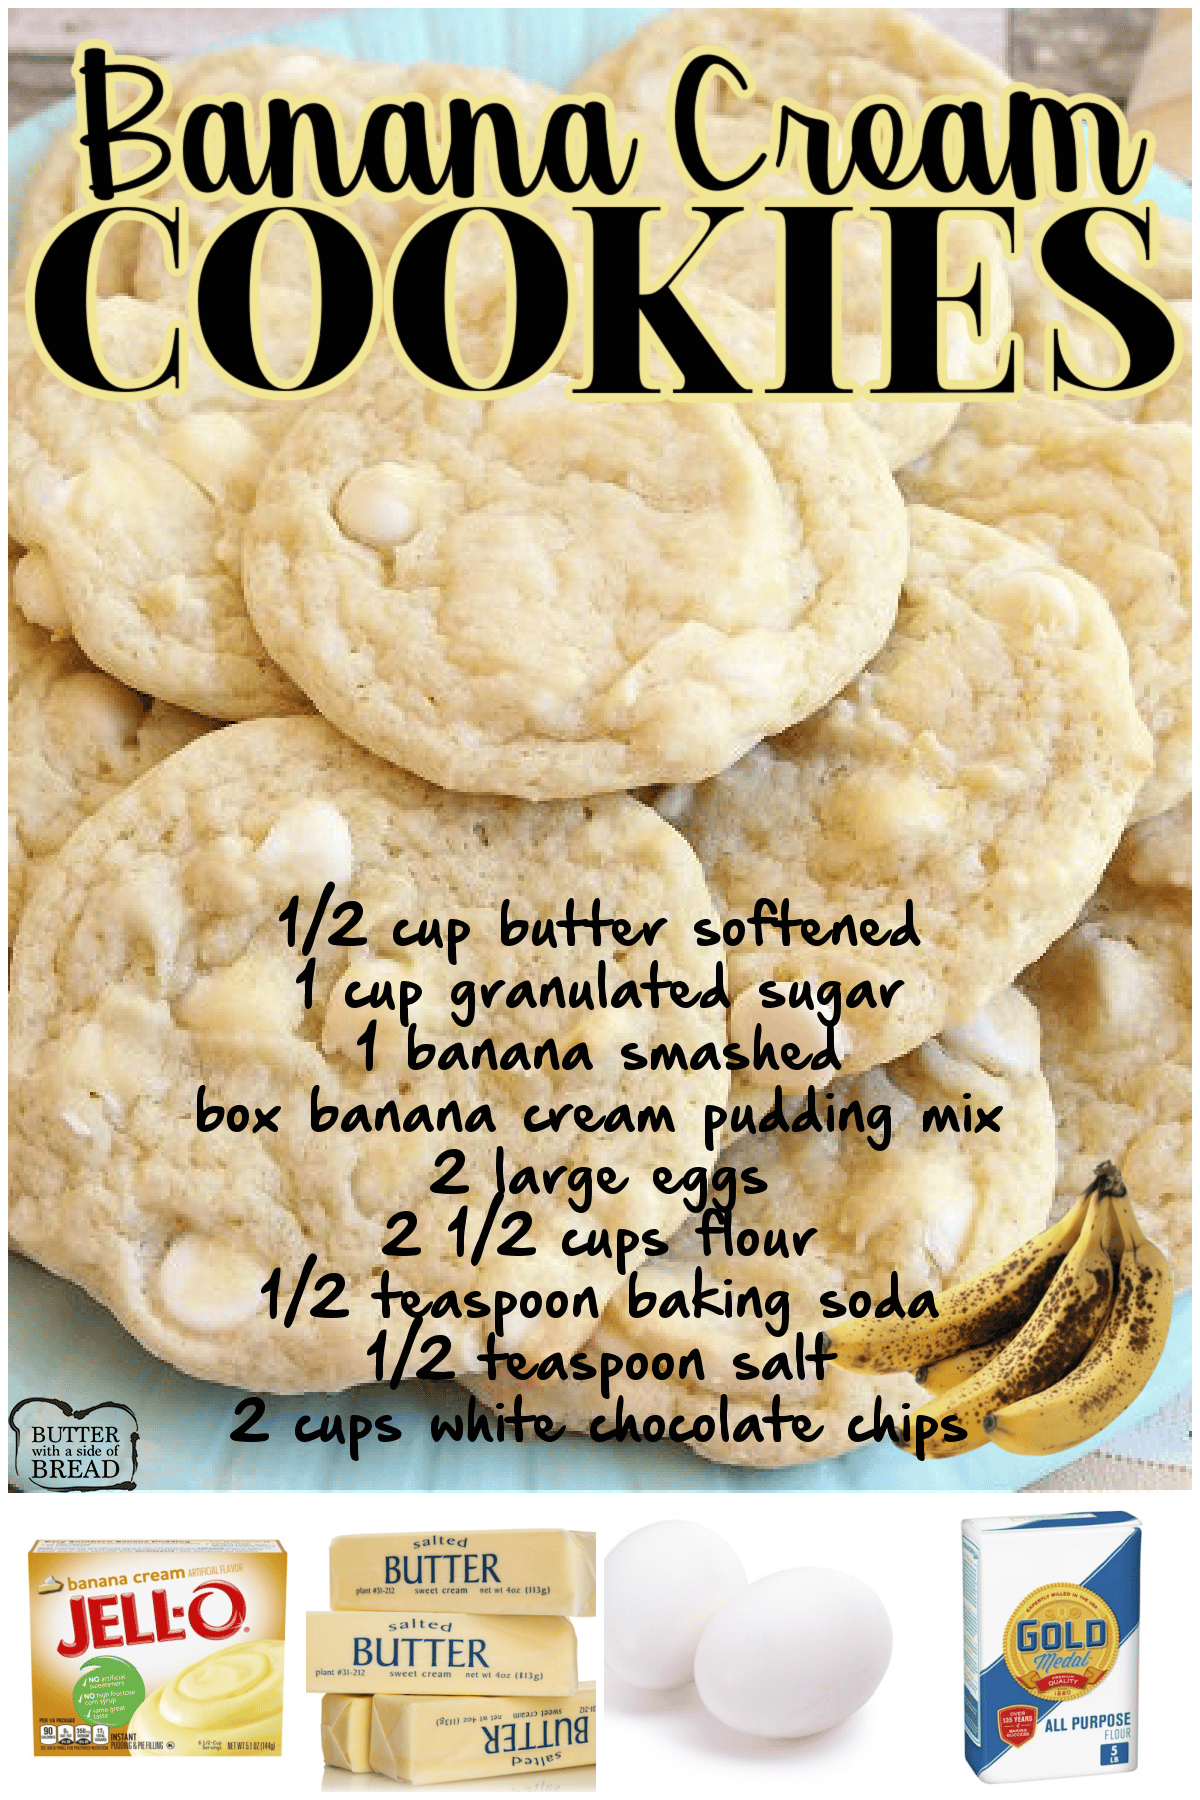 Banana Pudding Cookies made with a ripe banana for amazing pillowy soft cookies with great banana flavor! Banana cream cookies have pudding mix in them that makes them perfect!